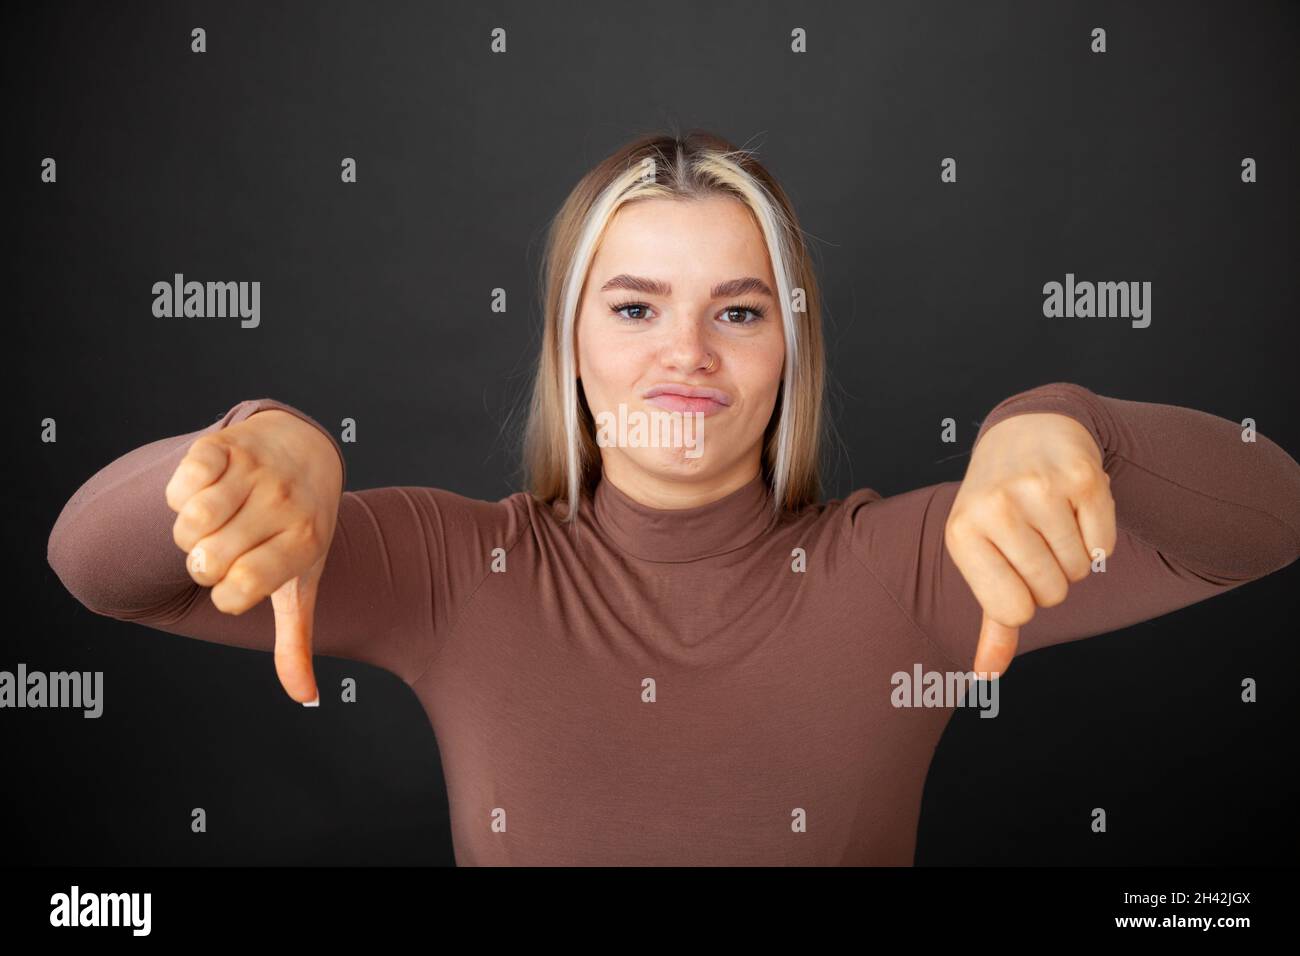 Portrait of disappointed young woman standing with thumbs down Stock Photo